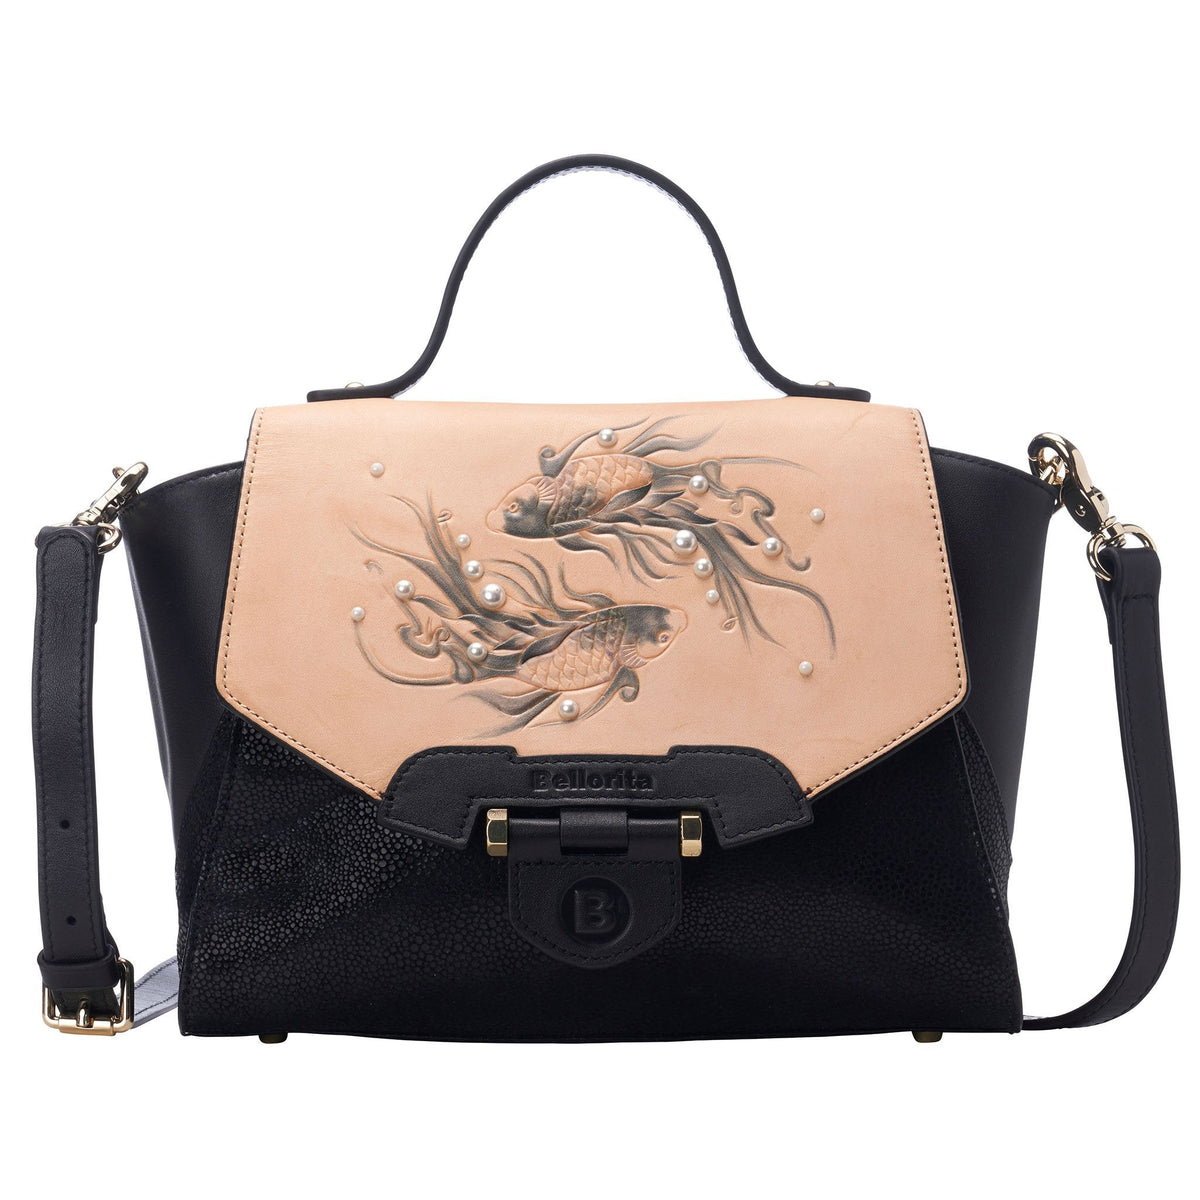 Bags & Luggage - Women's Bags - Top-Handle Bags Fish Small Black Satchel